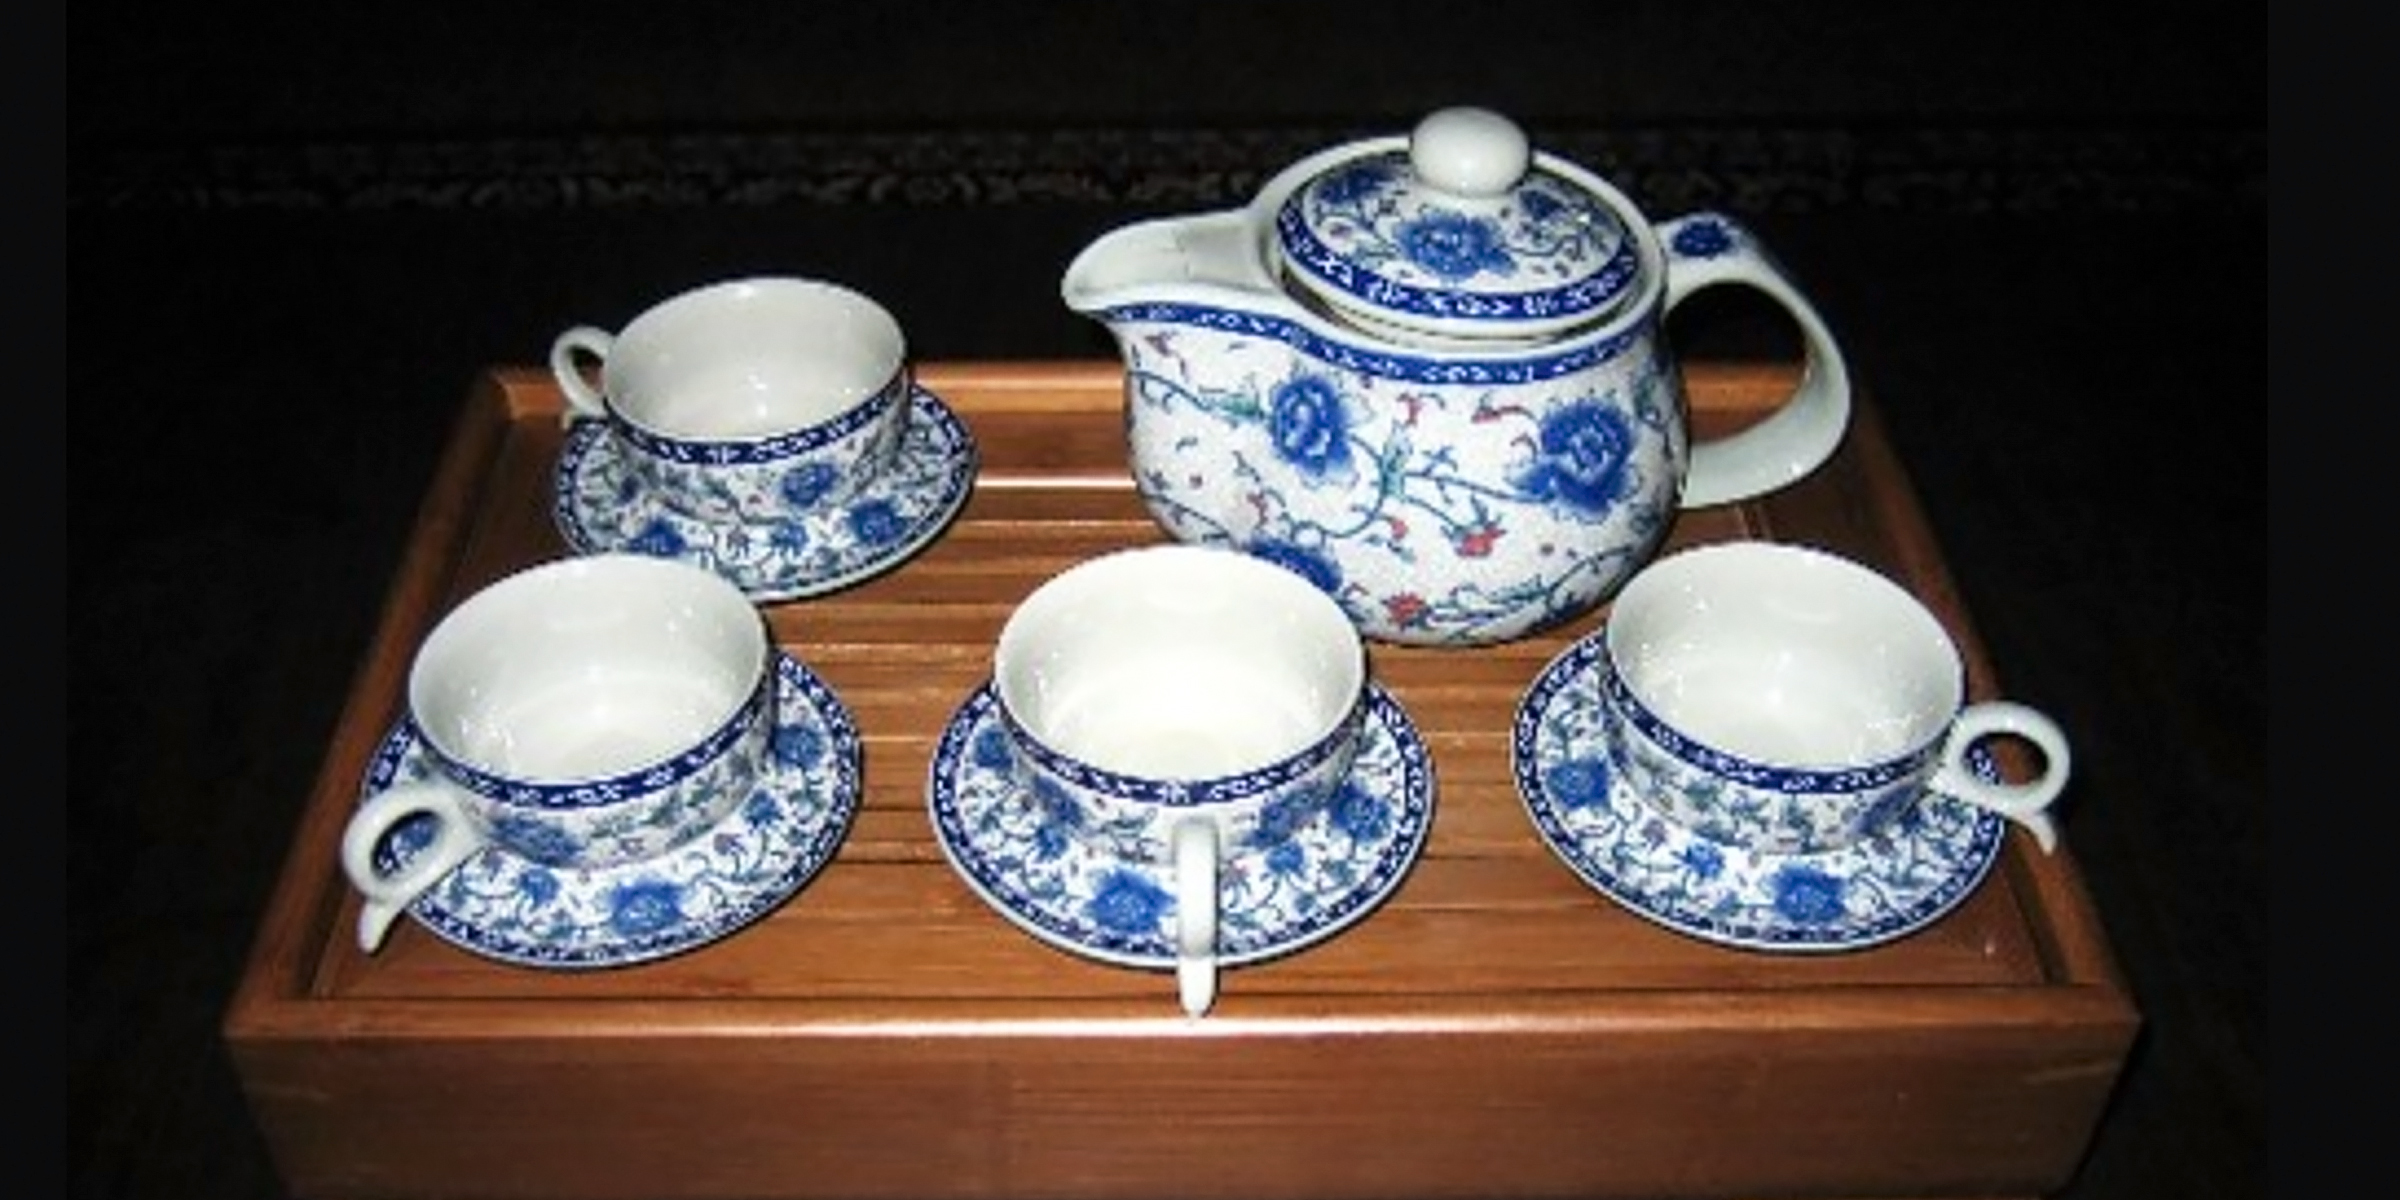 A blue and white tea set | Source: Flickr